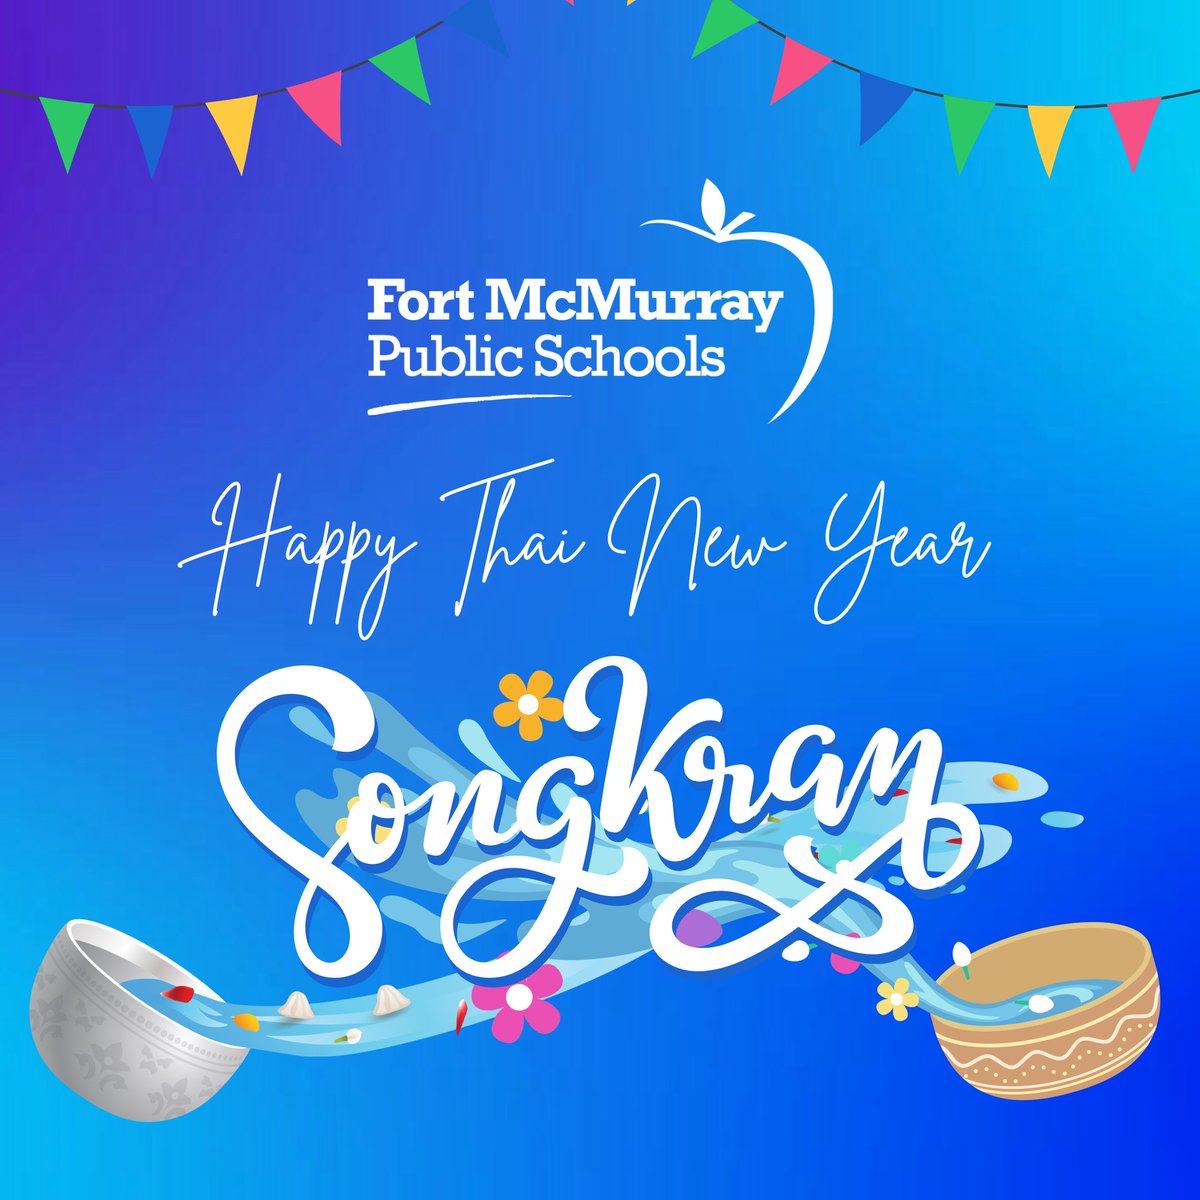 Happy Songkran to all celebrating! This vibrant festival marks the Thai New Year with brilliant festivities and a spirit of renewal. May your days be filled with joy and cultural reflections. @annaleeskinner #FMPSD #YMM #RMWB